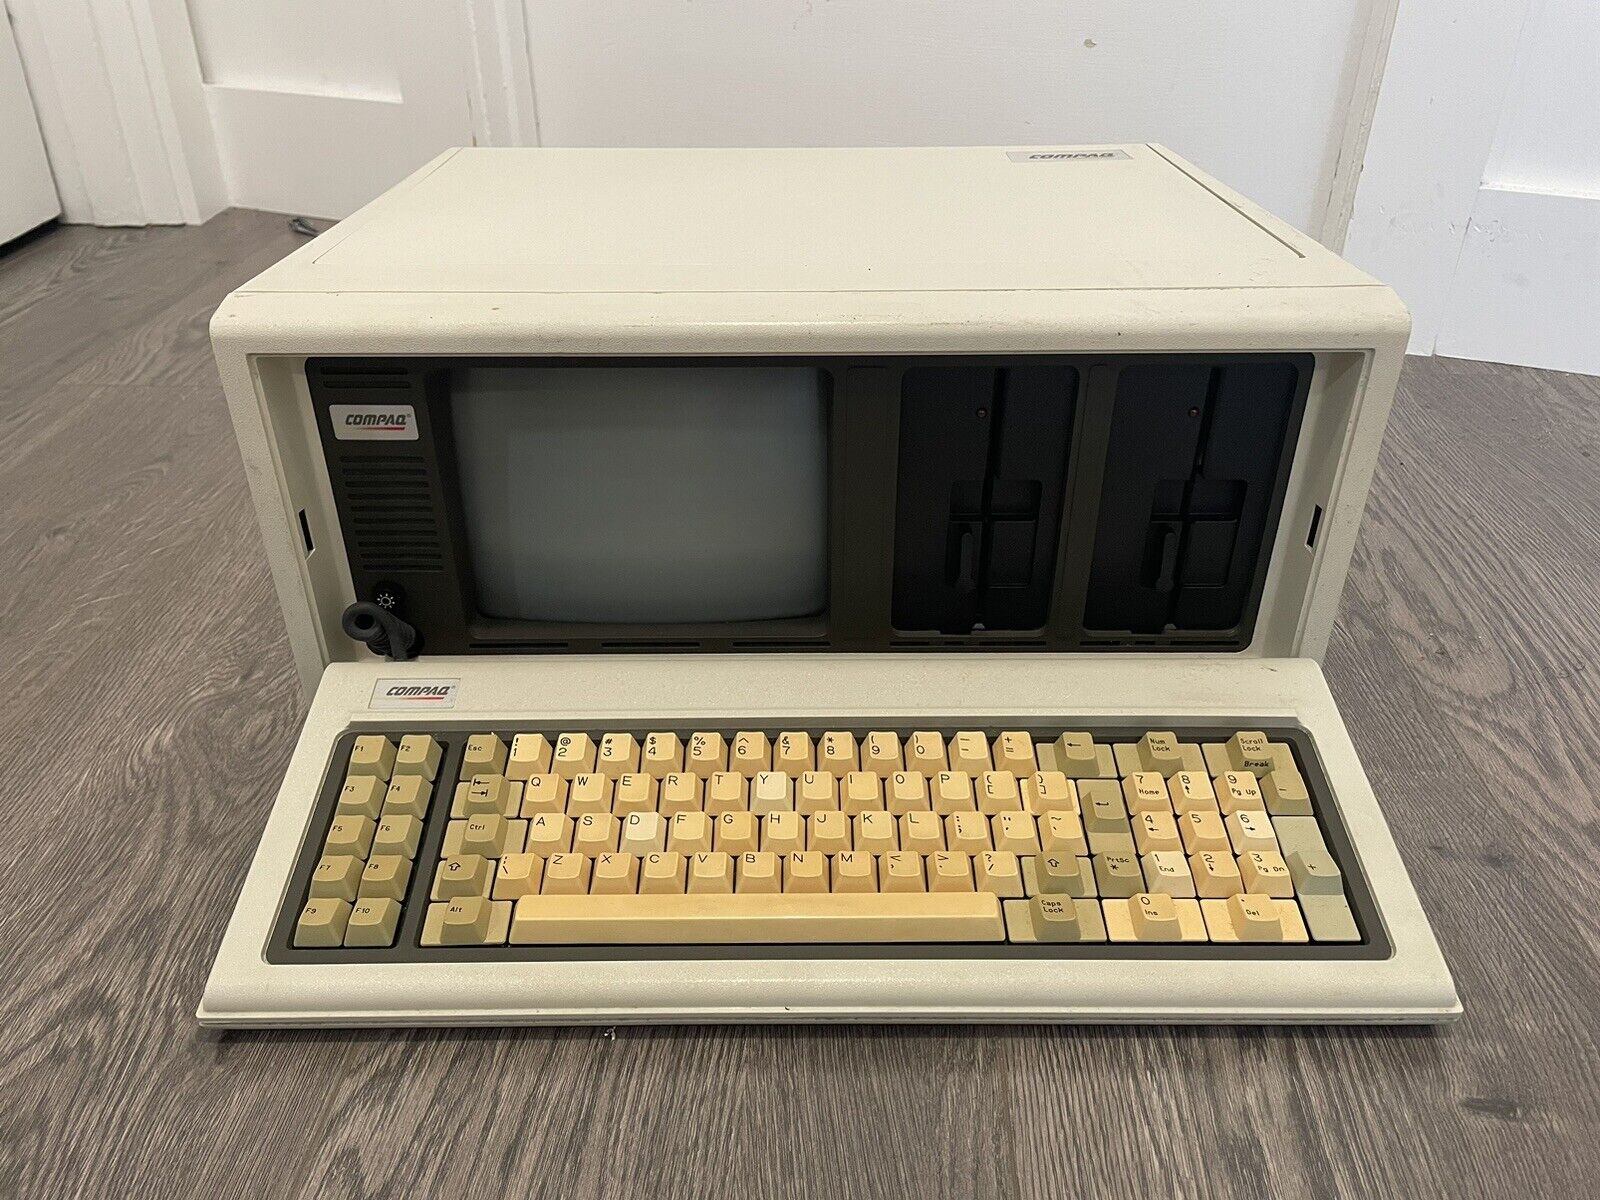 Vintage Compaq Portable Computer Powers On SCREEN DOES NOT PRODUCE IMAGE